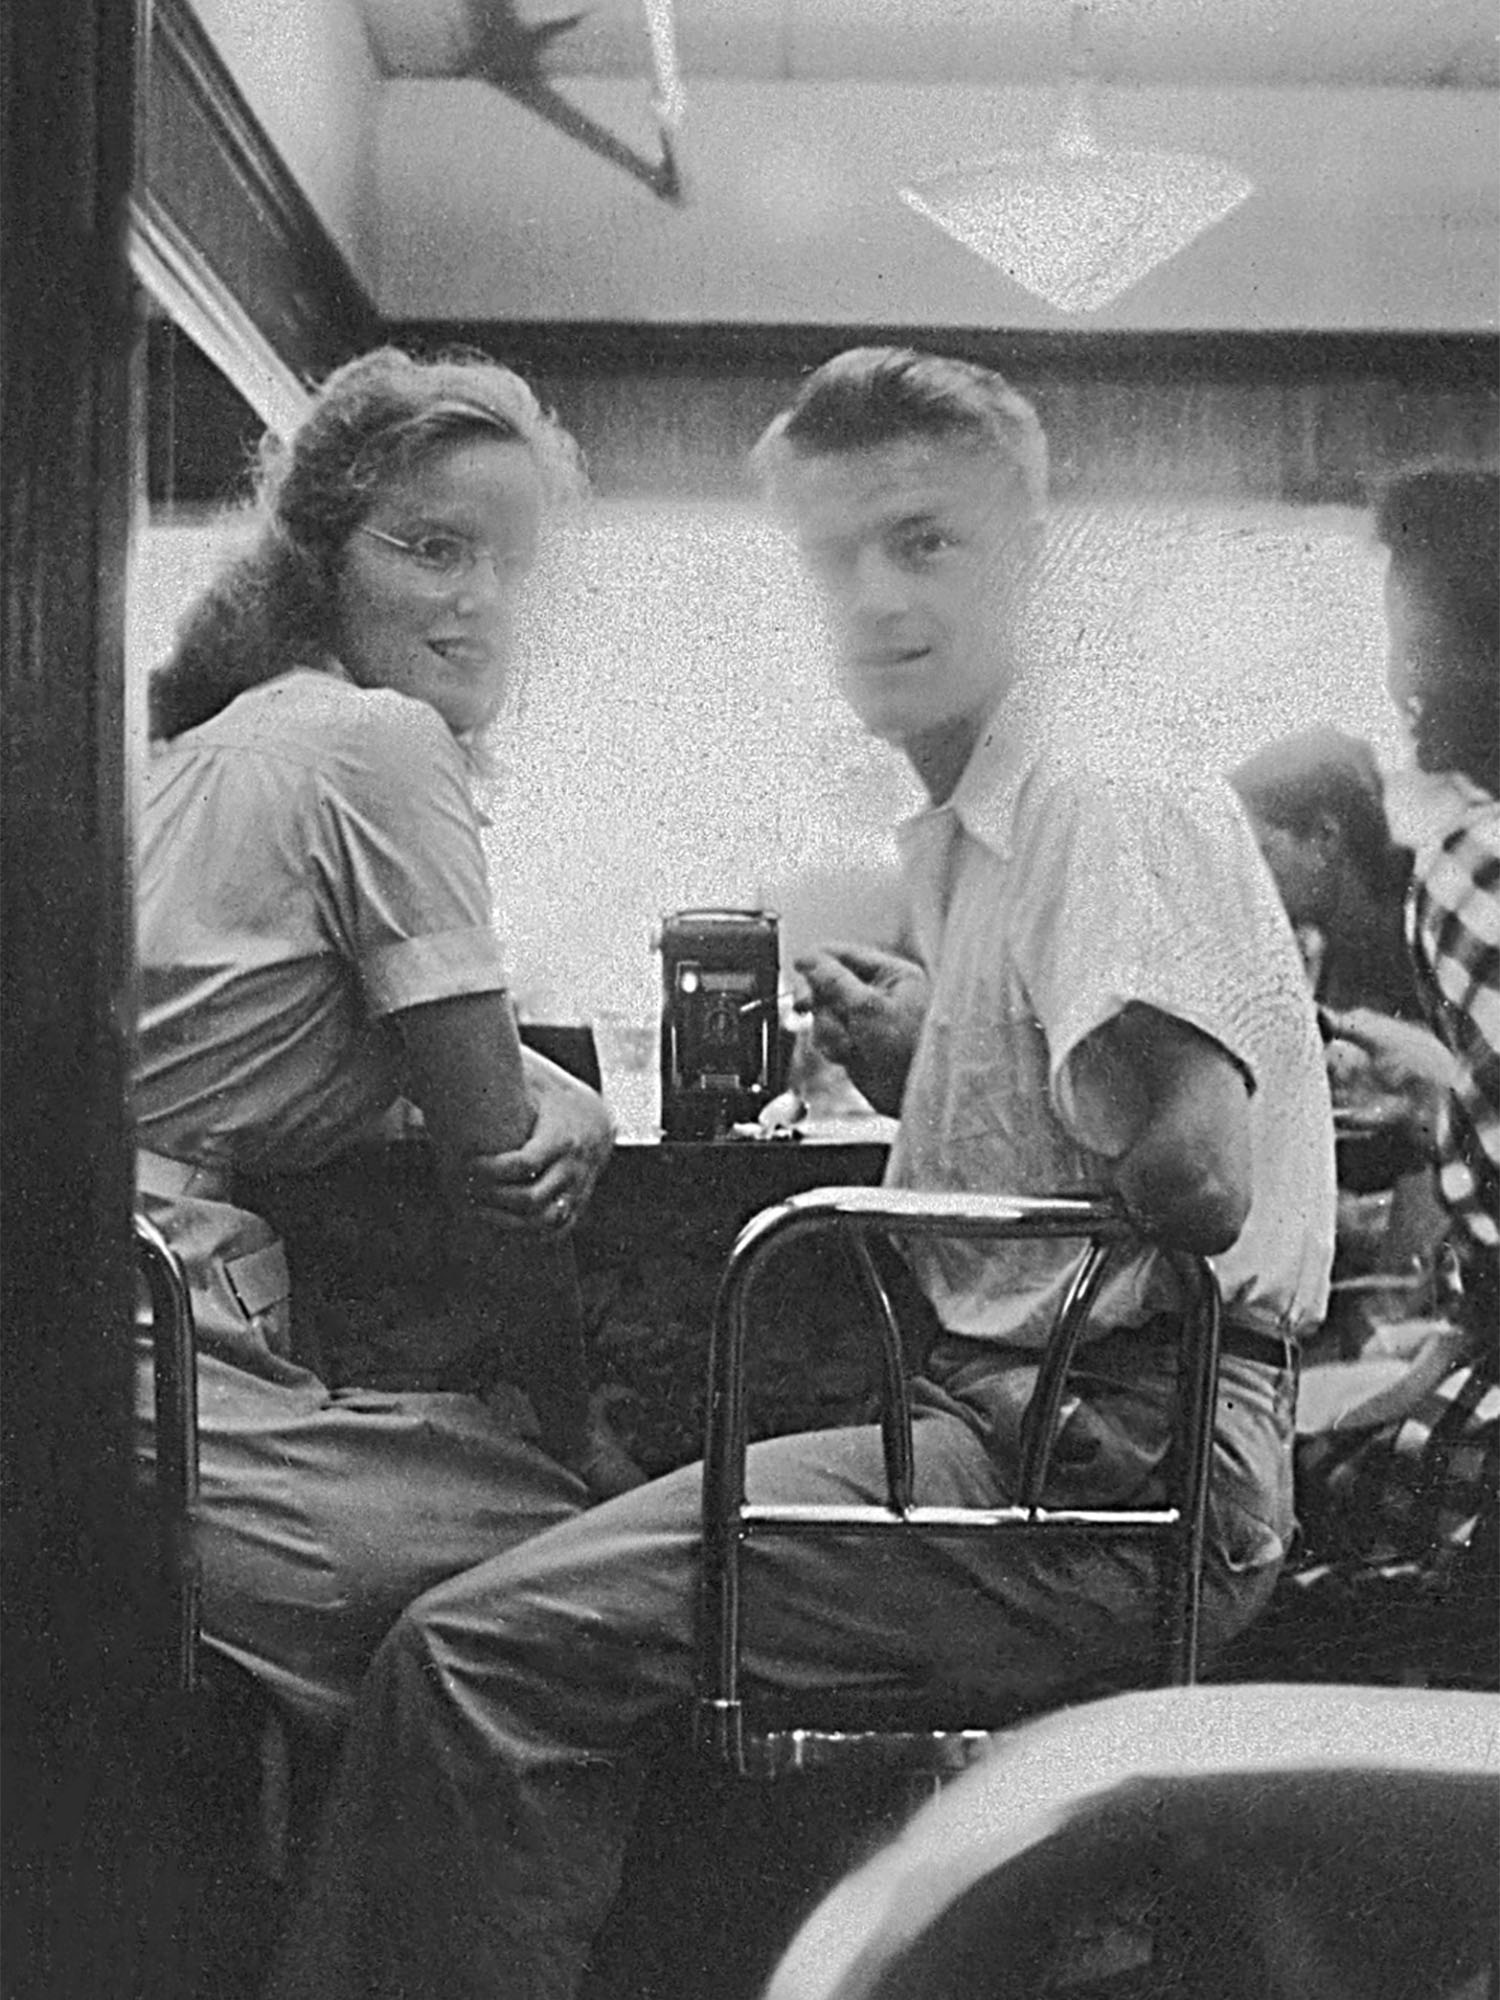 John Silber (Hon.’95) used a mirror to take a picture of himself and his wife-to-be, Kathryn, at a Texas diner in 1946. Photo courtesy of the Silber family